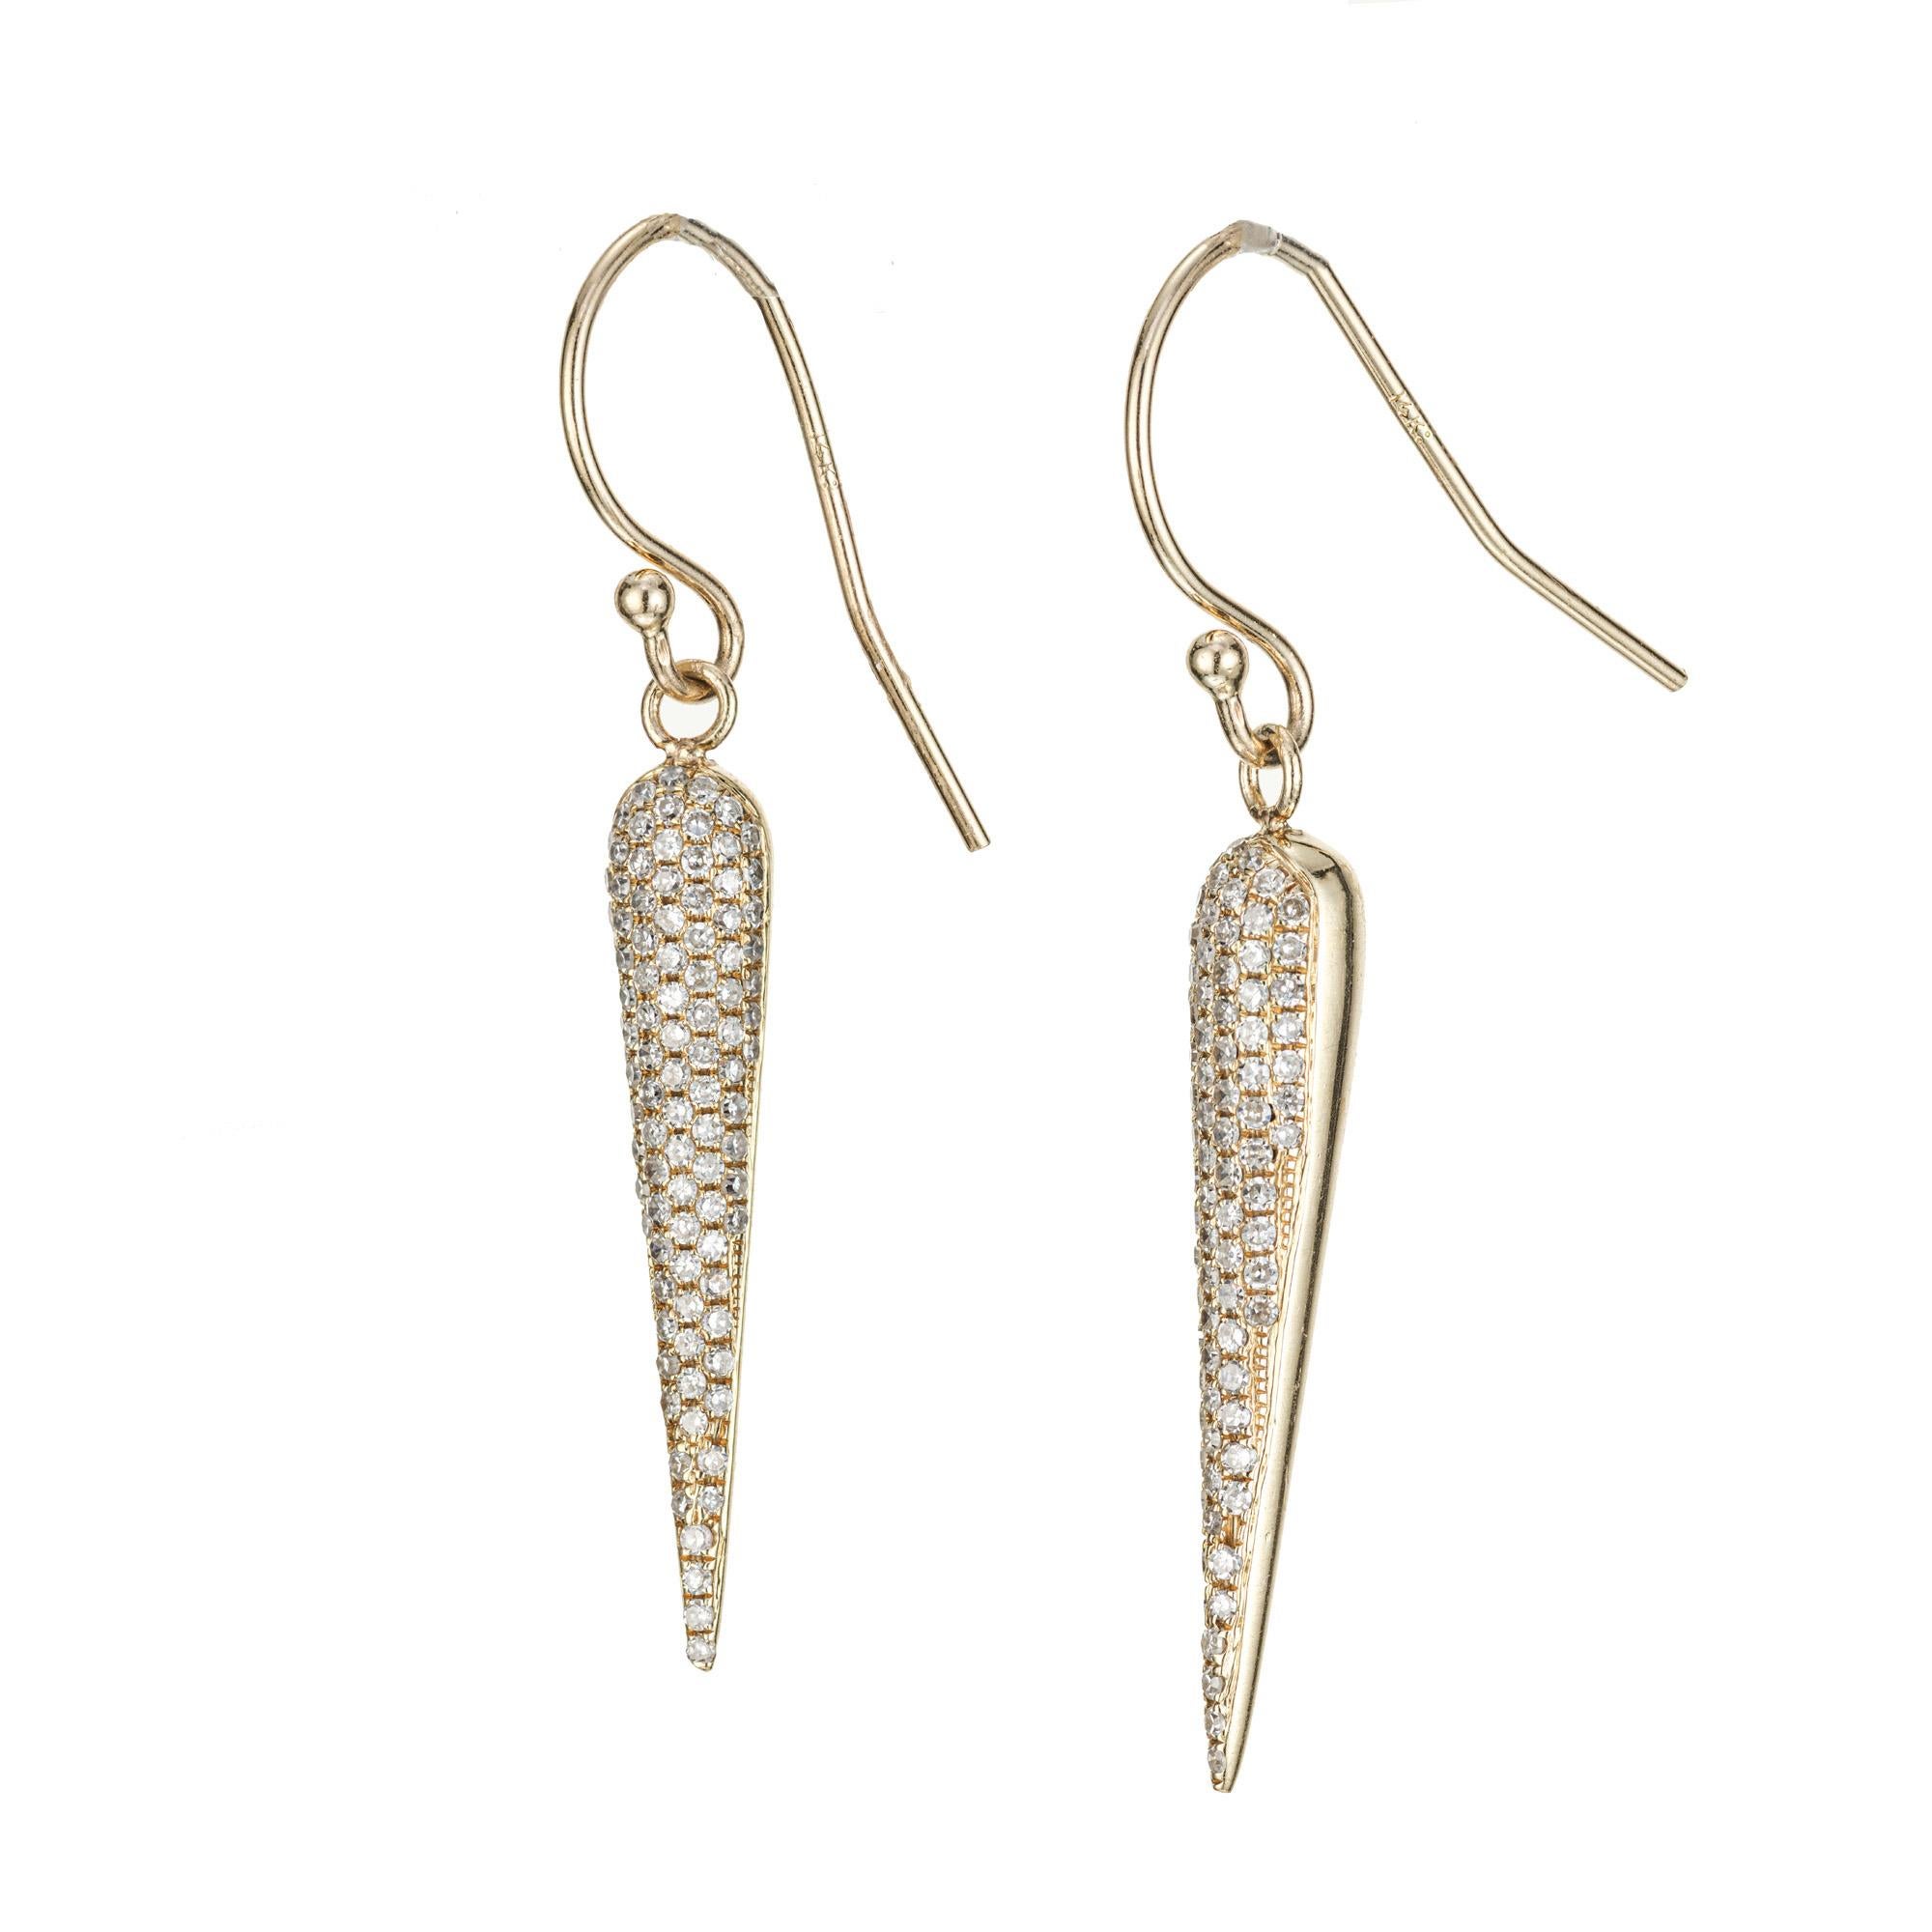 Simple and stylish pointed pave diamond earrings

196 round diamonds, H-I I approx. .75cts
14k yellow gold 
Stamped: 14k
2.5 grams
Top to bottom: 35.6mm or 1.4 Inches
Width: 4.2mm or .16 Inches
Depth or thickness: 4.2mm
